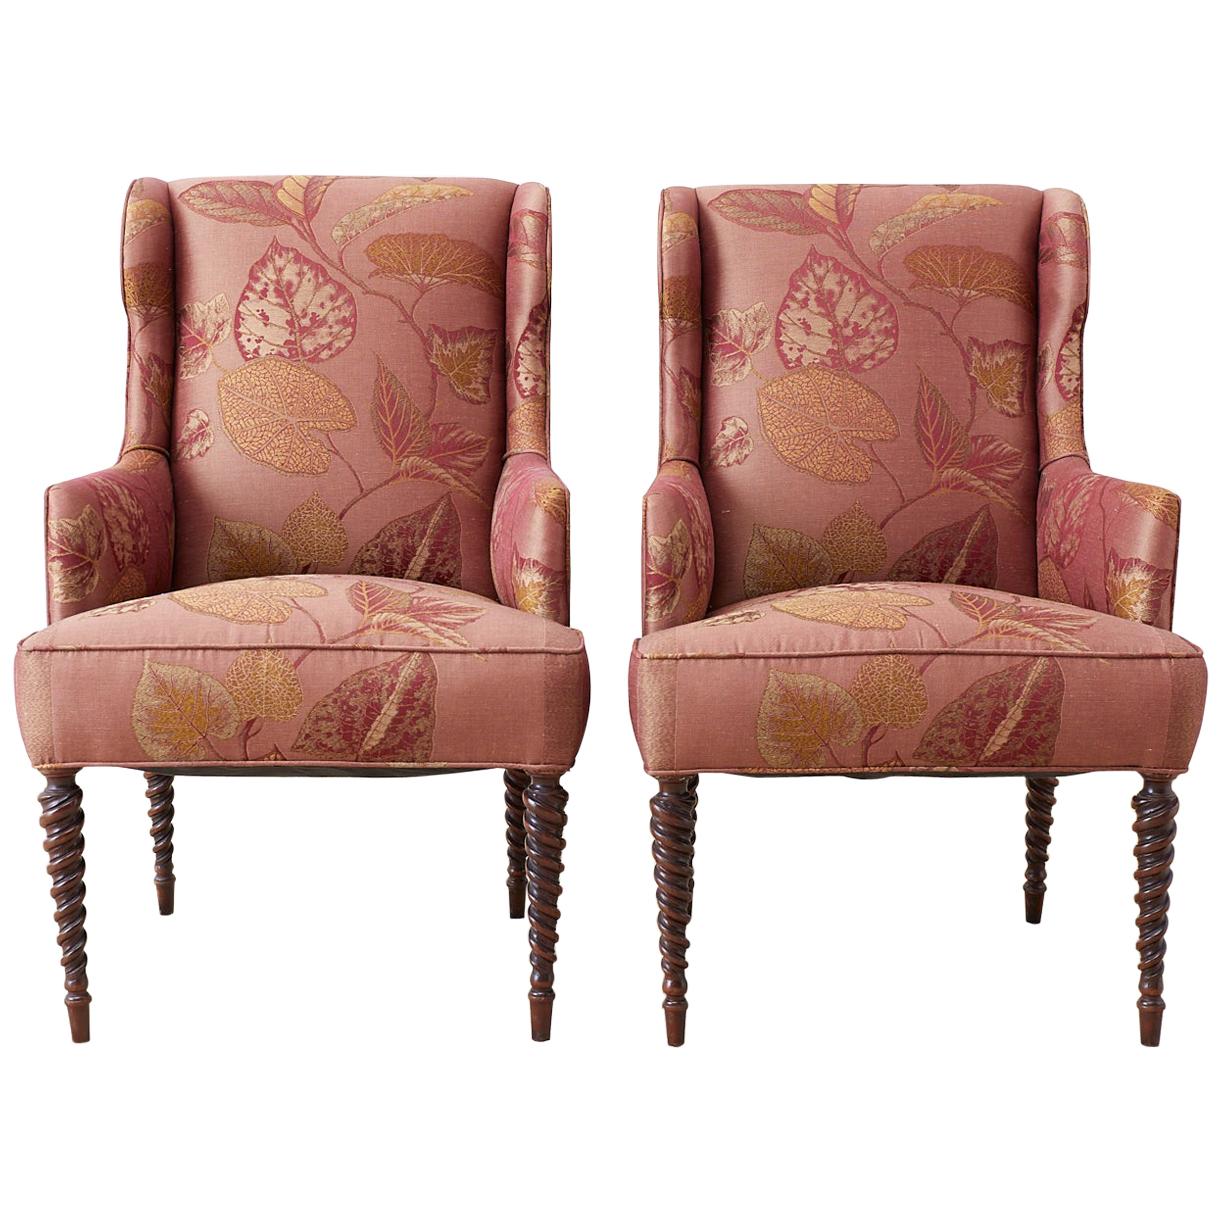 Pair of Upholstered Wingback Chairs with Barley Twist Legs